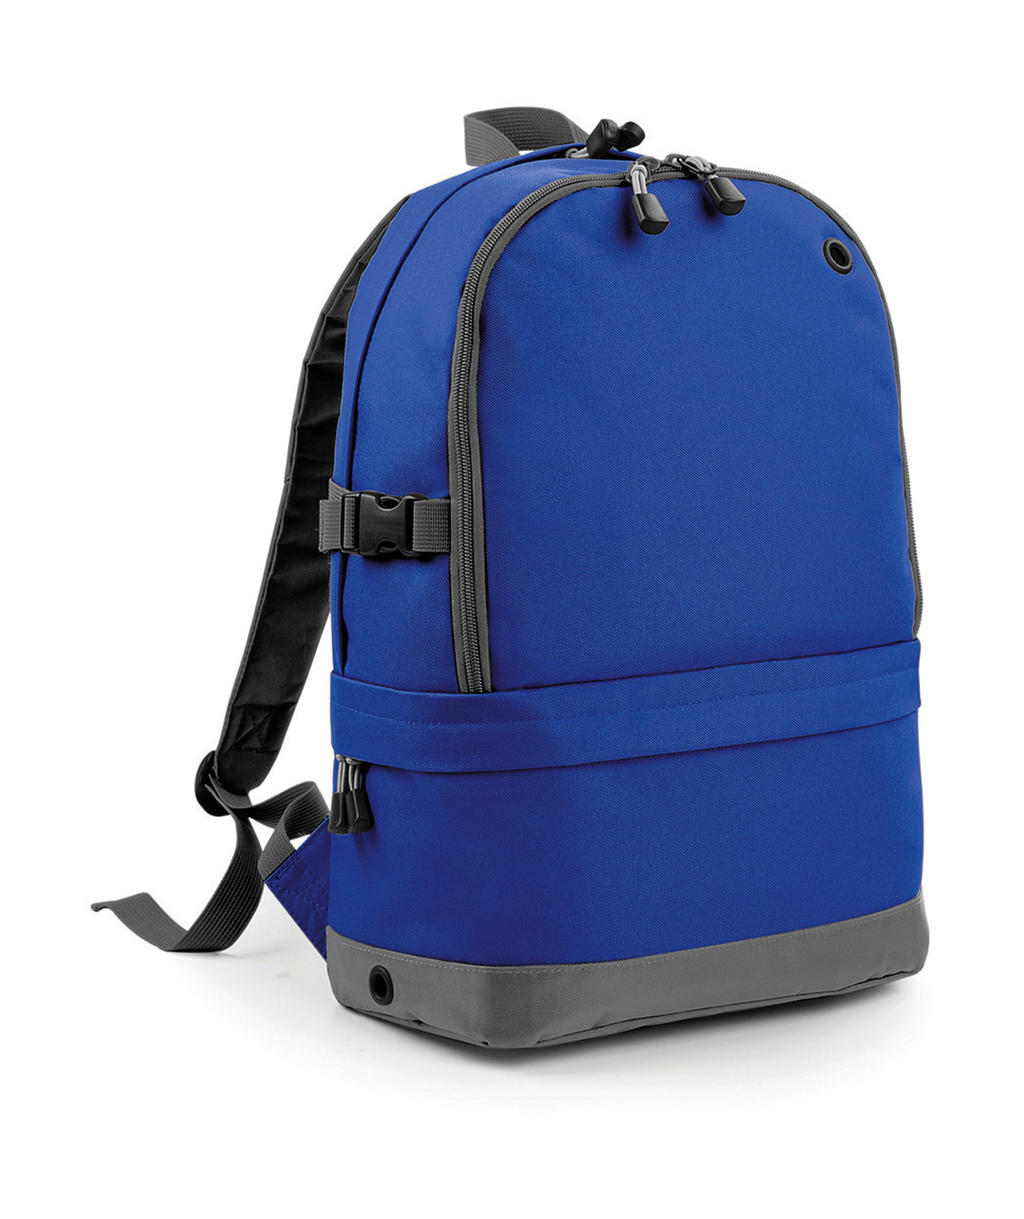  Athleisure Pro Backpack in Farbe Bright Royal